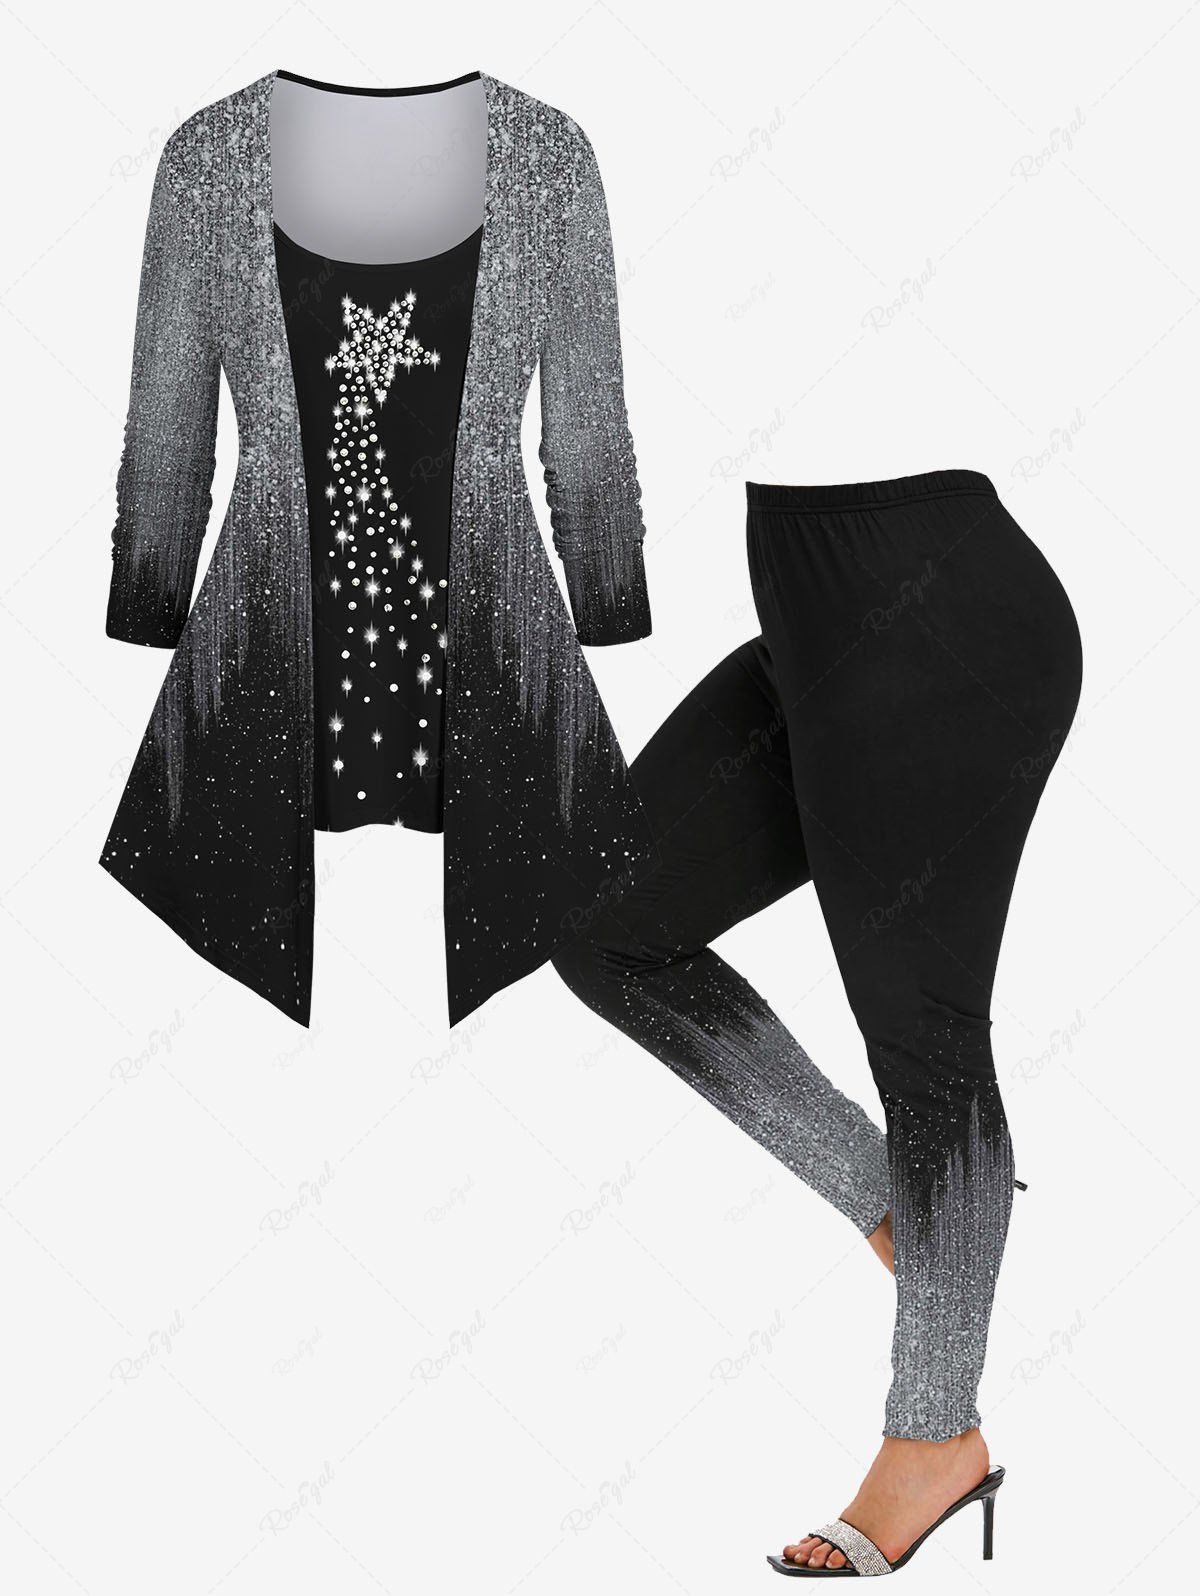 Cheap Stars Sparkling Sequin Colorblock Glitter 3D Printed Long Sleeve 2 In 1 T-shirt and Leggings Plus Size Outfit  